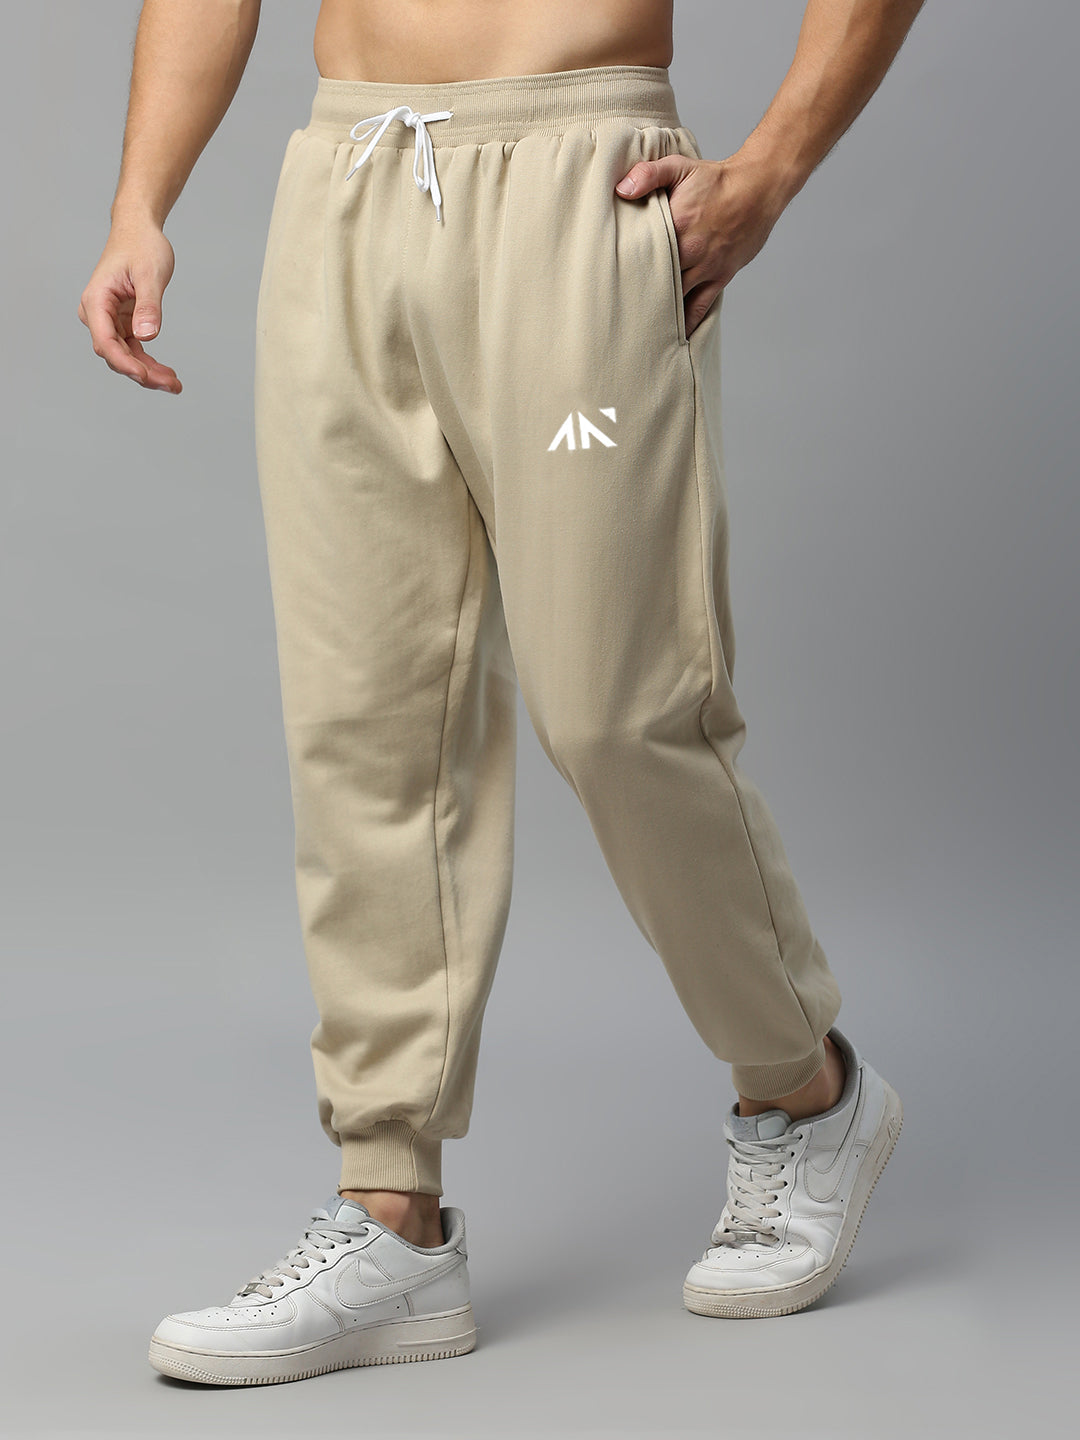 Winter is here, track pants are what will keep you warm and comfy | HT Shop  Now